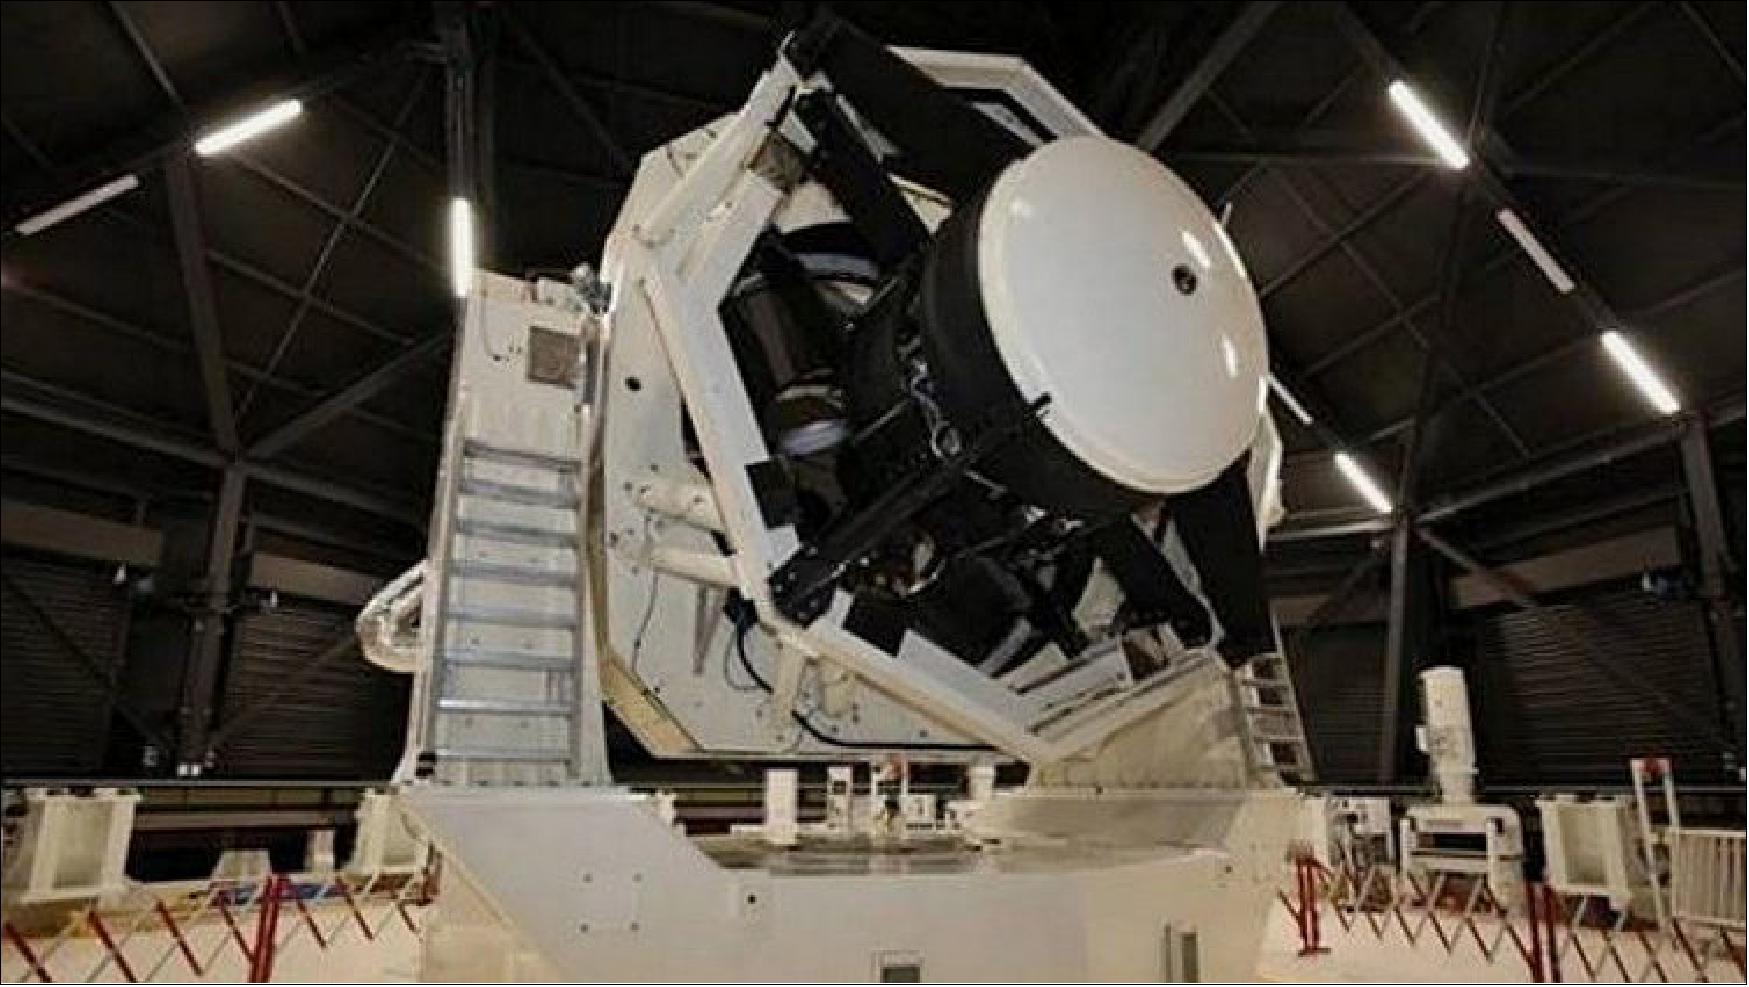 Figure 2: The Space Surveillance Telescope is seen here at the joint Australian-US space facility at Exmouth on Western Australia’s Coral Coast (image credit: Commonwealth of Australia 2020)